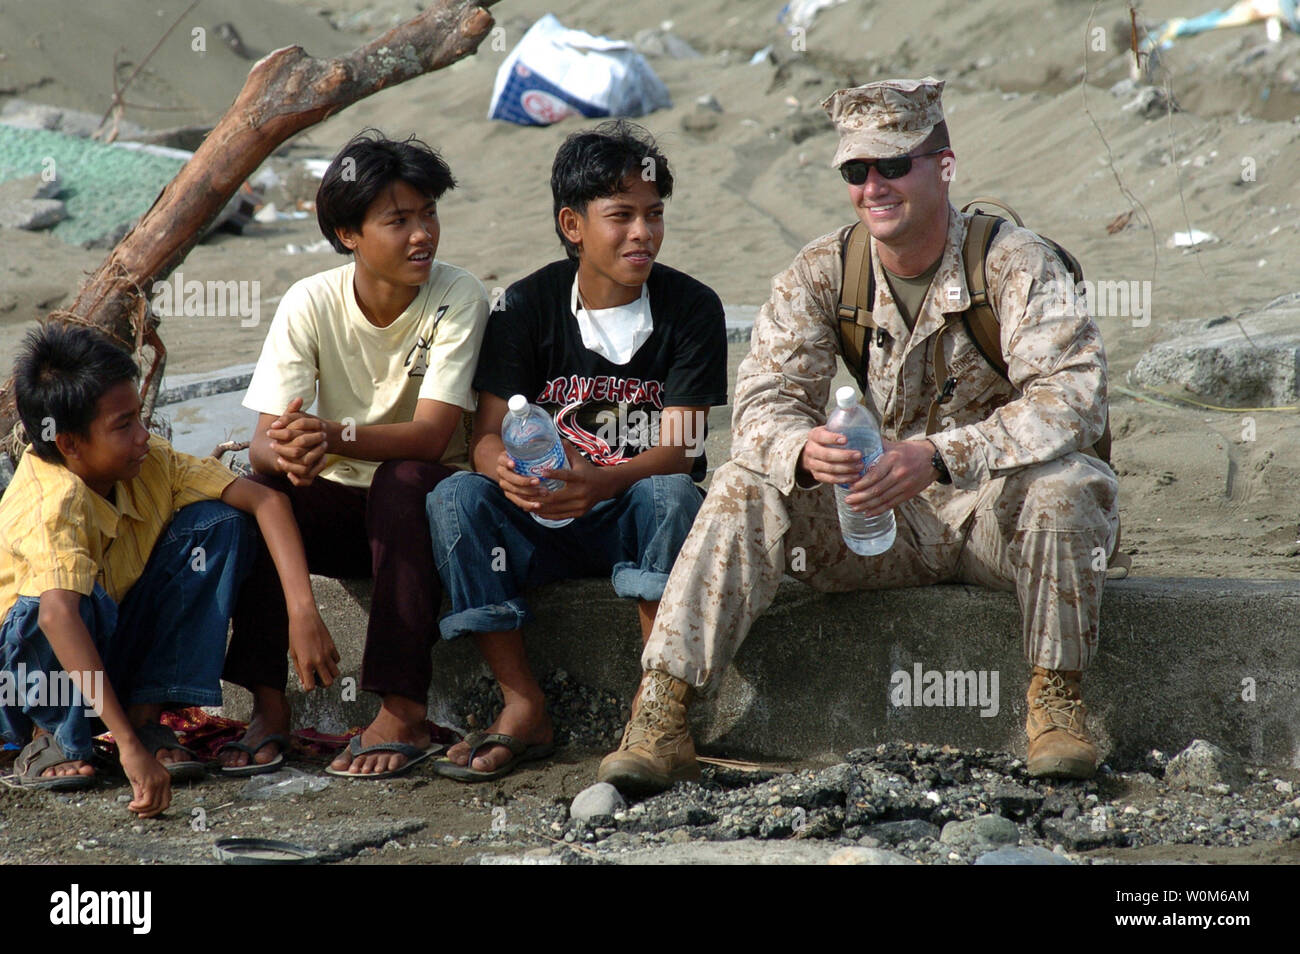 Marine Capt. Jamey Stover, assigned to the 15th Marine Expeditionary Unit (MEU), sits down with local Indonesian children as Sailors and Marines offload supplies from a Landing Craft Air Cushion (LCAC) in Meulaboh, Sumatra, Indonesia on Jan. 11, 2005.   (UPI Photo/Alan D. Monyelle/US Navy) Stock Photo